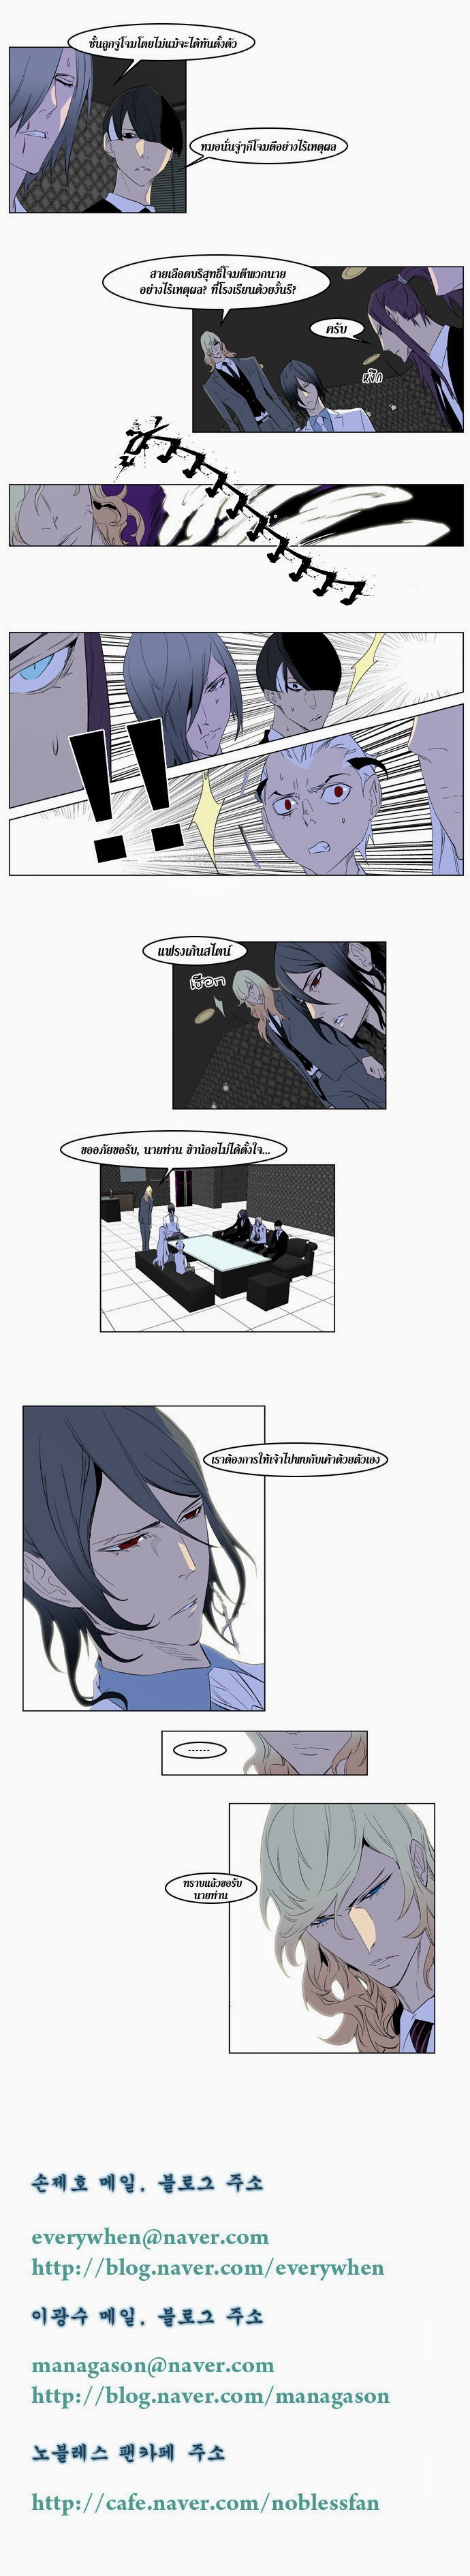 Noblesse 164 012